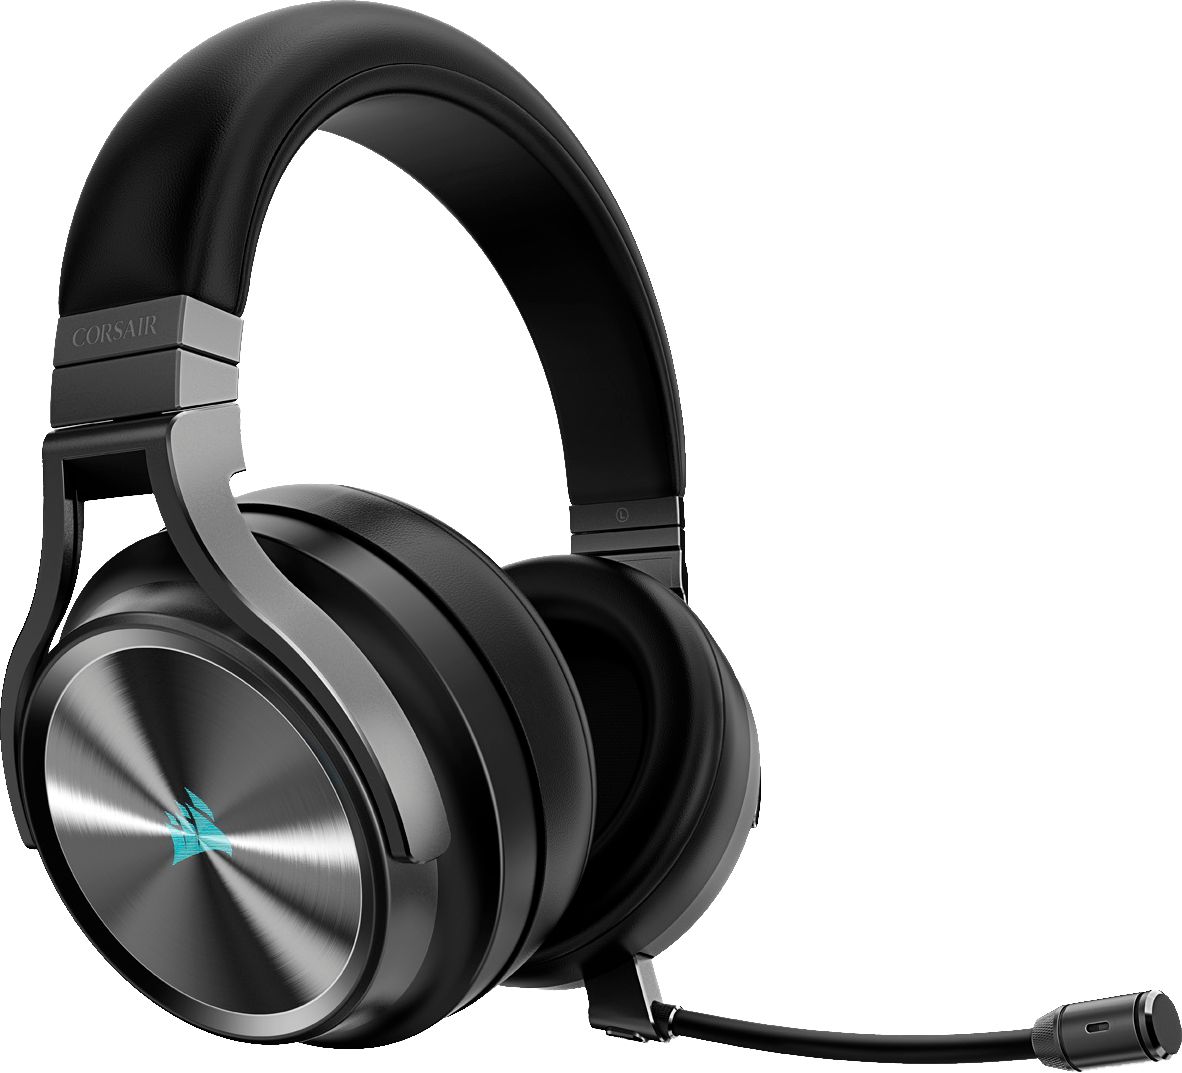 Forsendelse Vend om Dental CORSAIR VIRTUOSO RGB SE Wireless 7.1 Surround Sound Gaming Over-the-Ear  Headset for PC/Mac, Game Consoles, and Mobile Gunmetal CA-9011180-NA - Best  Buy